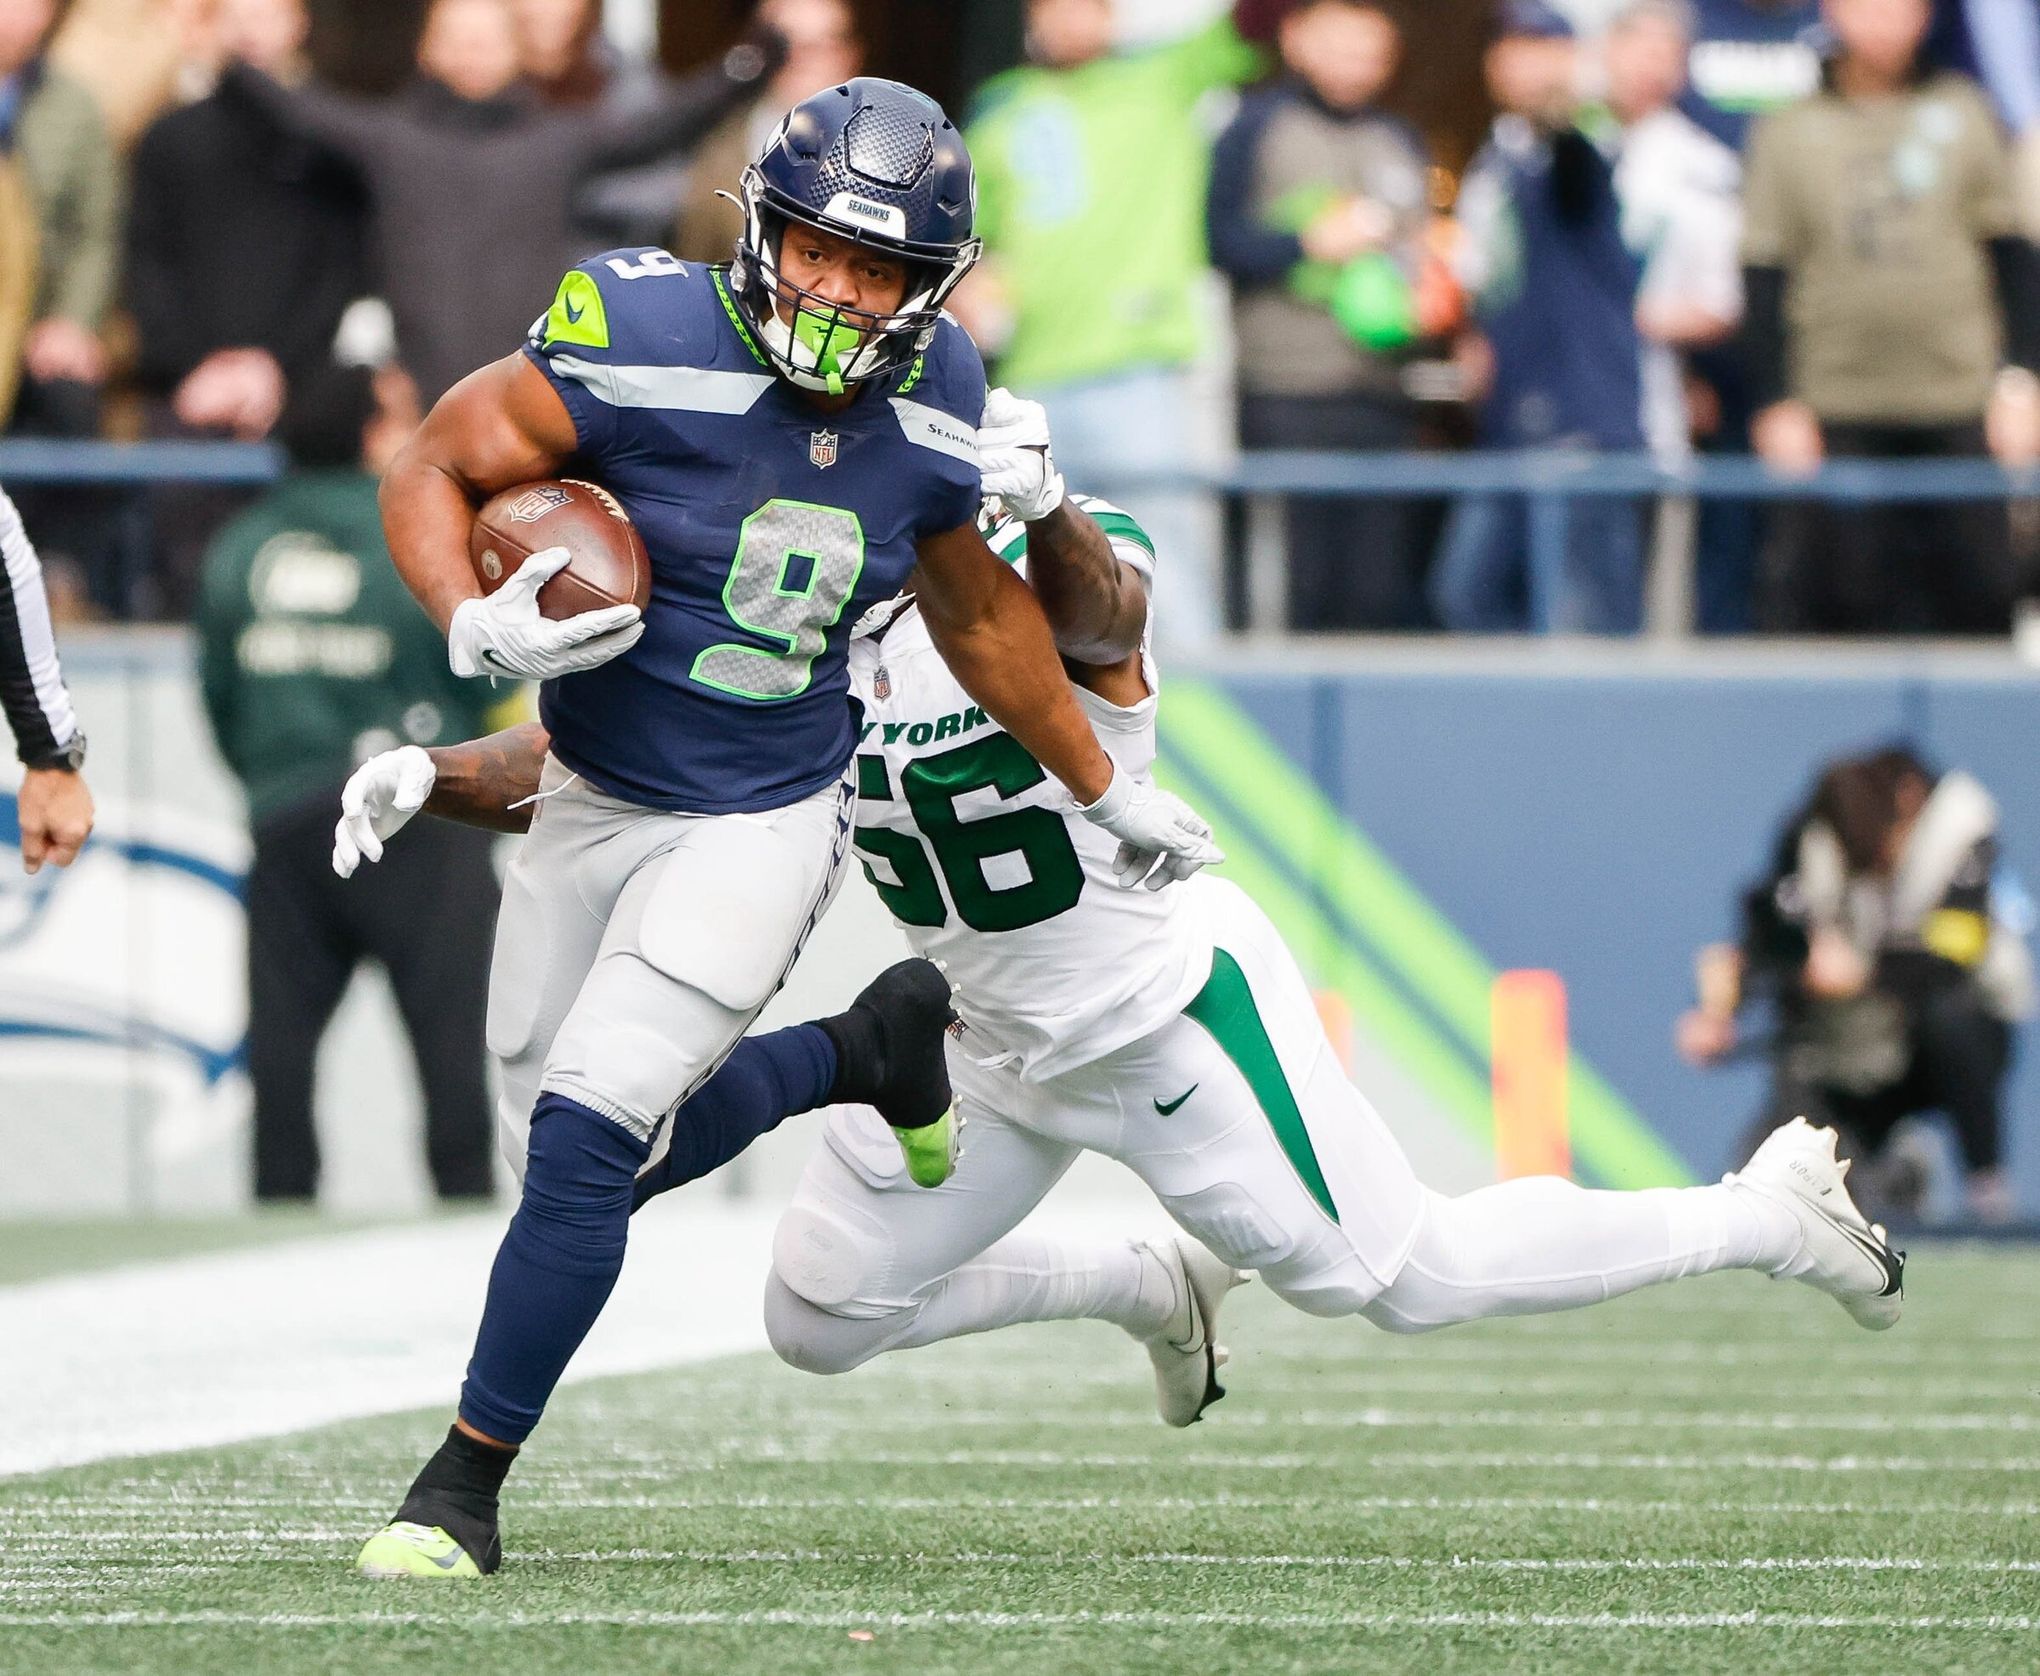 Next Gen Stats: Seahawks 3rd-Down Success May Be Key to Upset Cardinals